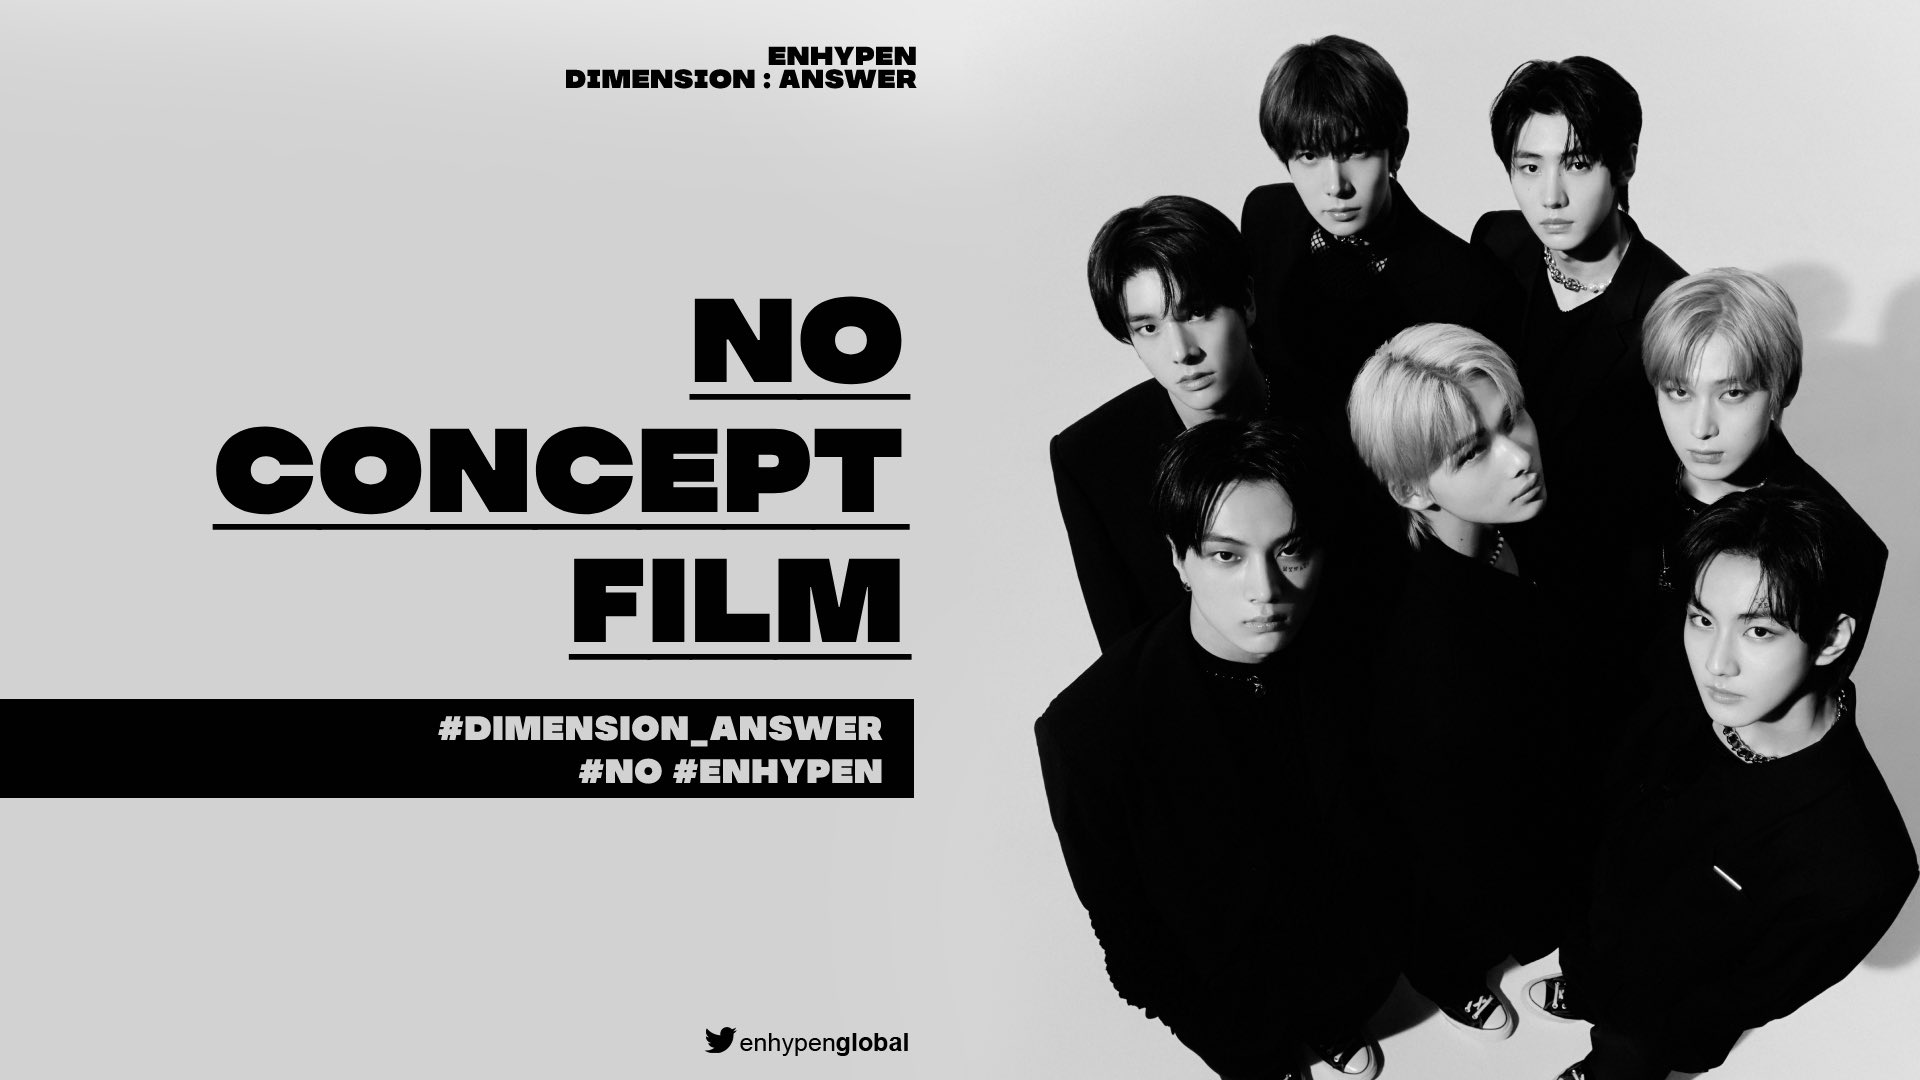 ENHYPEN GLOBAL, the concept film for ENHYPEN's Dimension, Answer 'NO' version is here! What do you think of their answer?